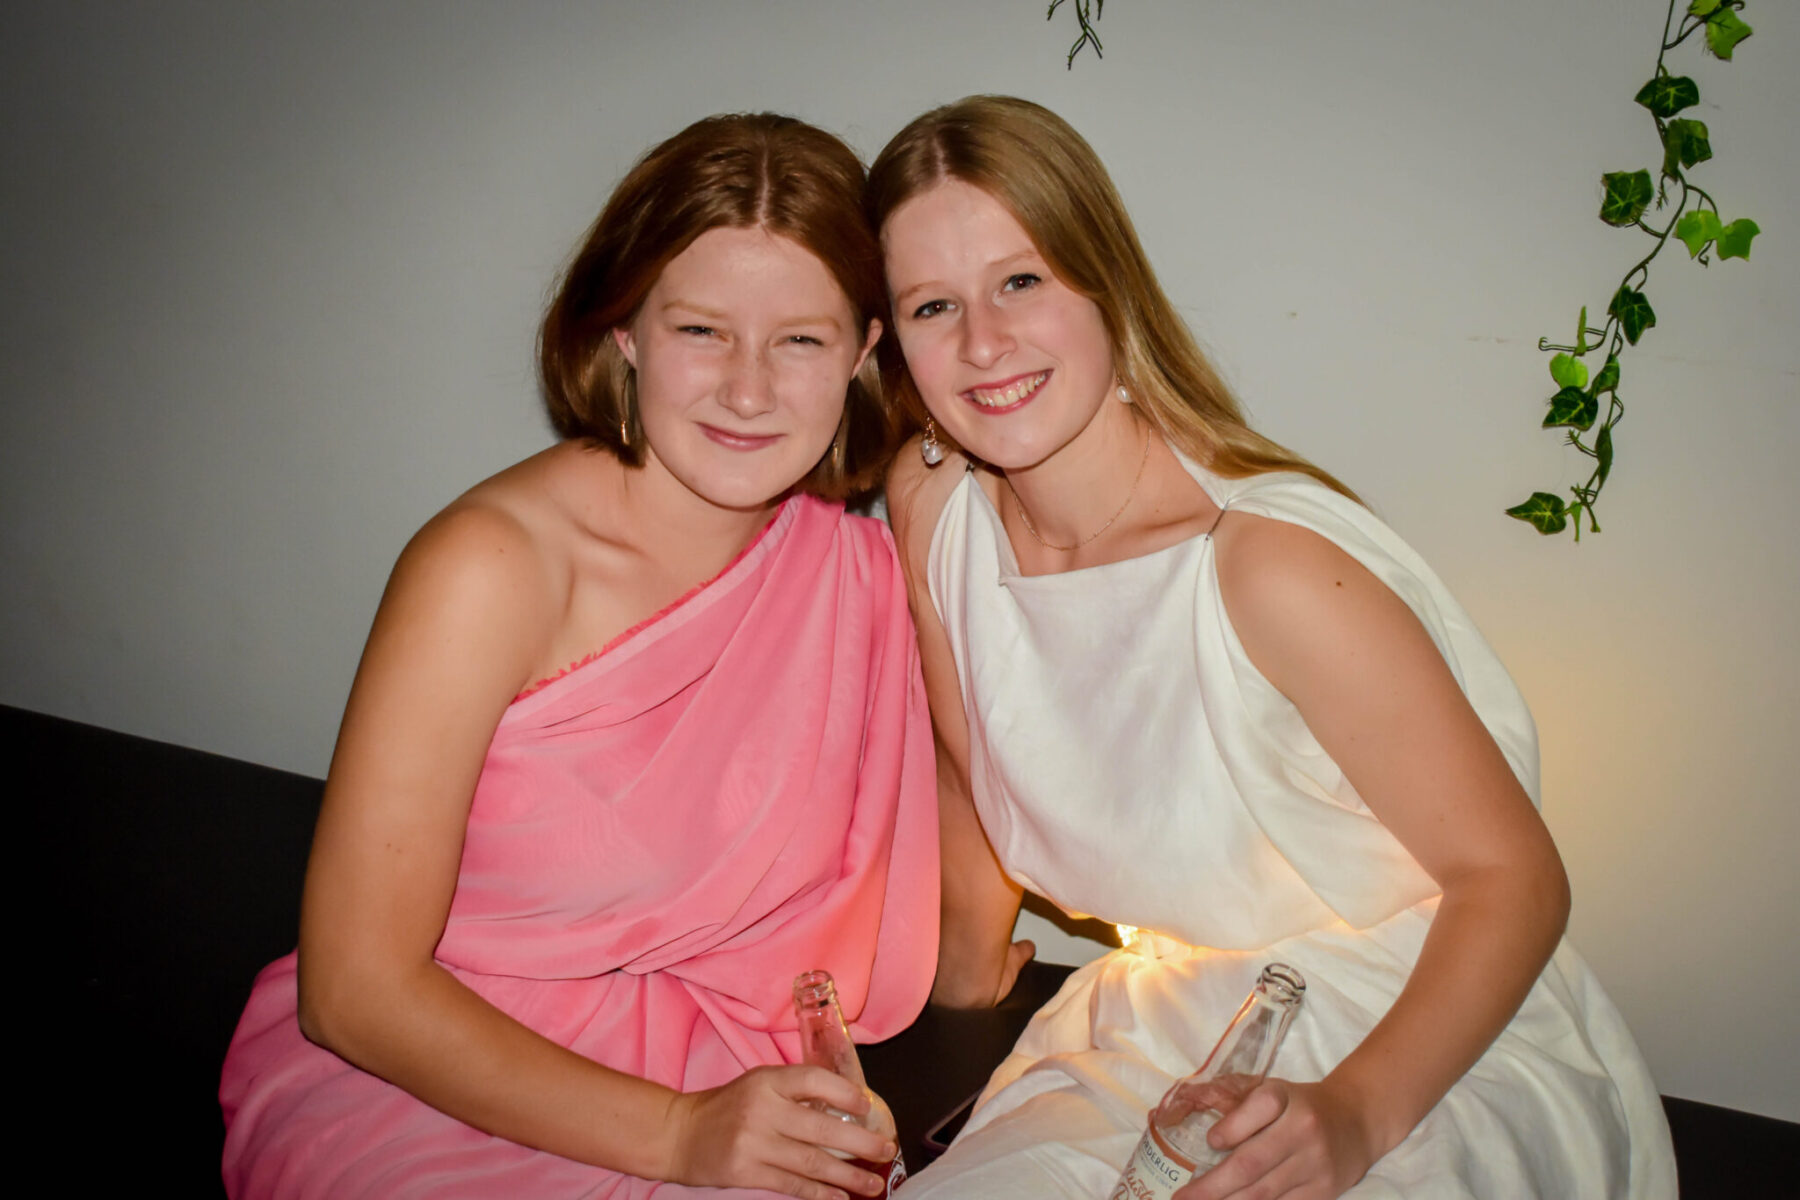 Classics-Week-Toga-Party-2021-Edited-15-scaled-1. Campion College Australia.